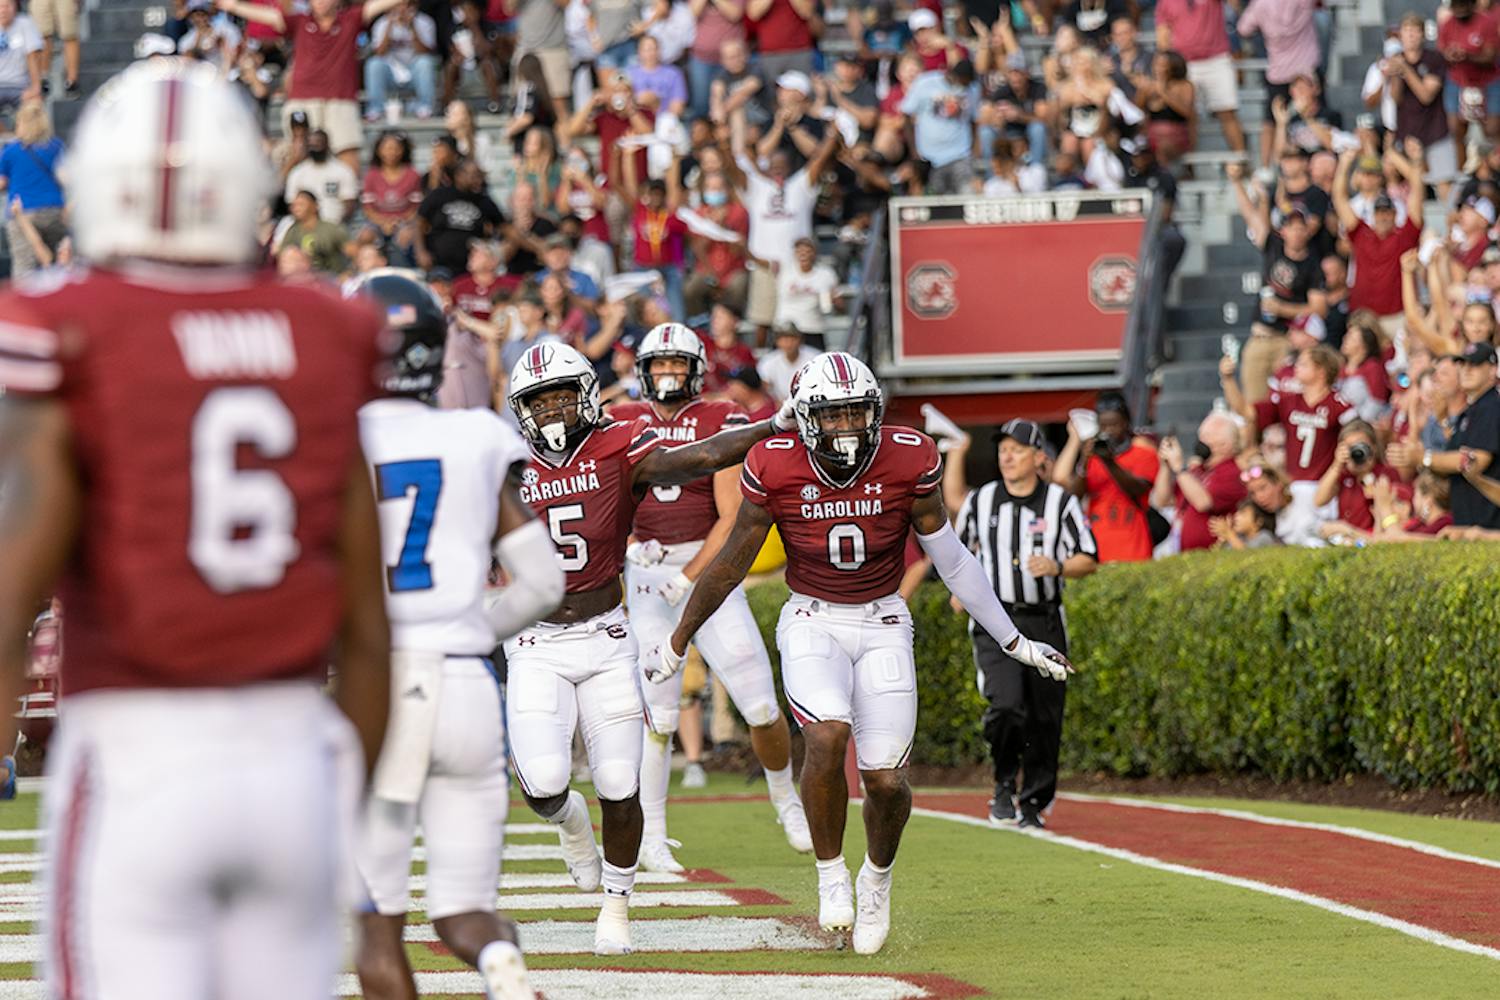 FILE— Sophomore tight end Jaheim Bell celebrates a touchdown pass from graduate student quarterback Zeb Noland. This touchdown would bring the Gamecocks to 15 points at the end of the first quarter in their game against East Illinois Panthers on Sept. 9, 2021.